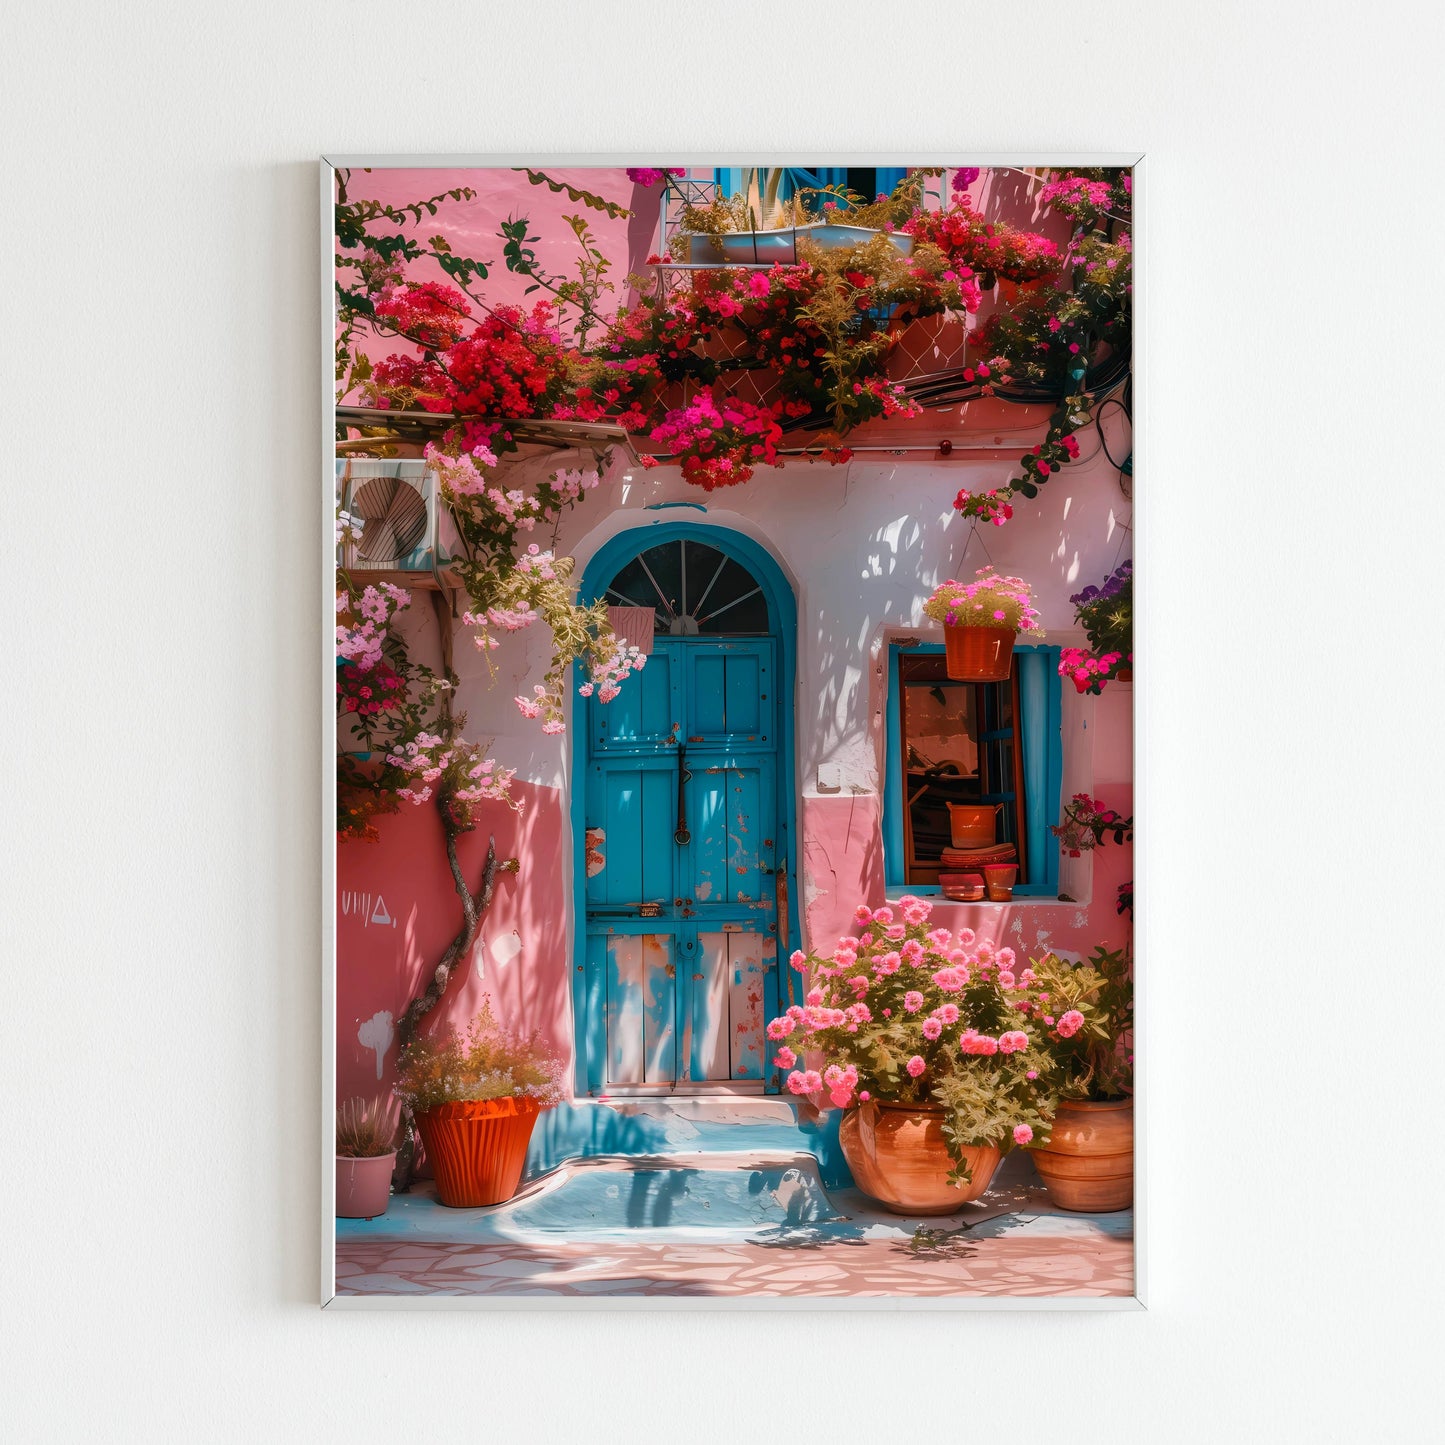 Blue Door, Pink Bougainvillea House - Printed Wall Art / Poster. This vibrant poster showcases a beautiful Mediterranean house. Arrives ready to hang.